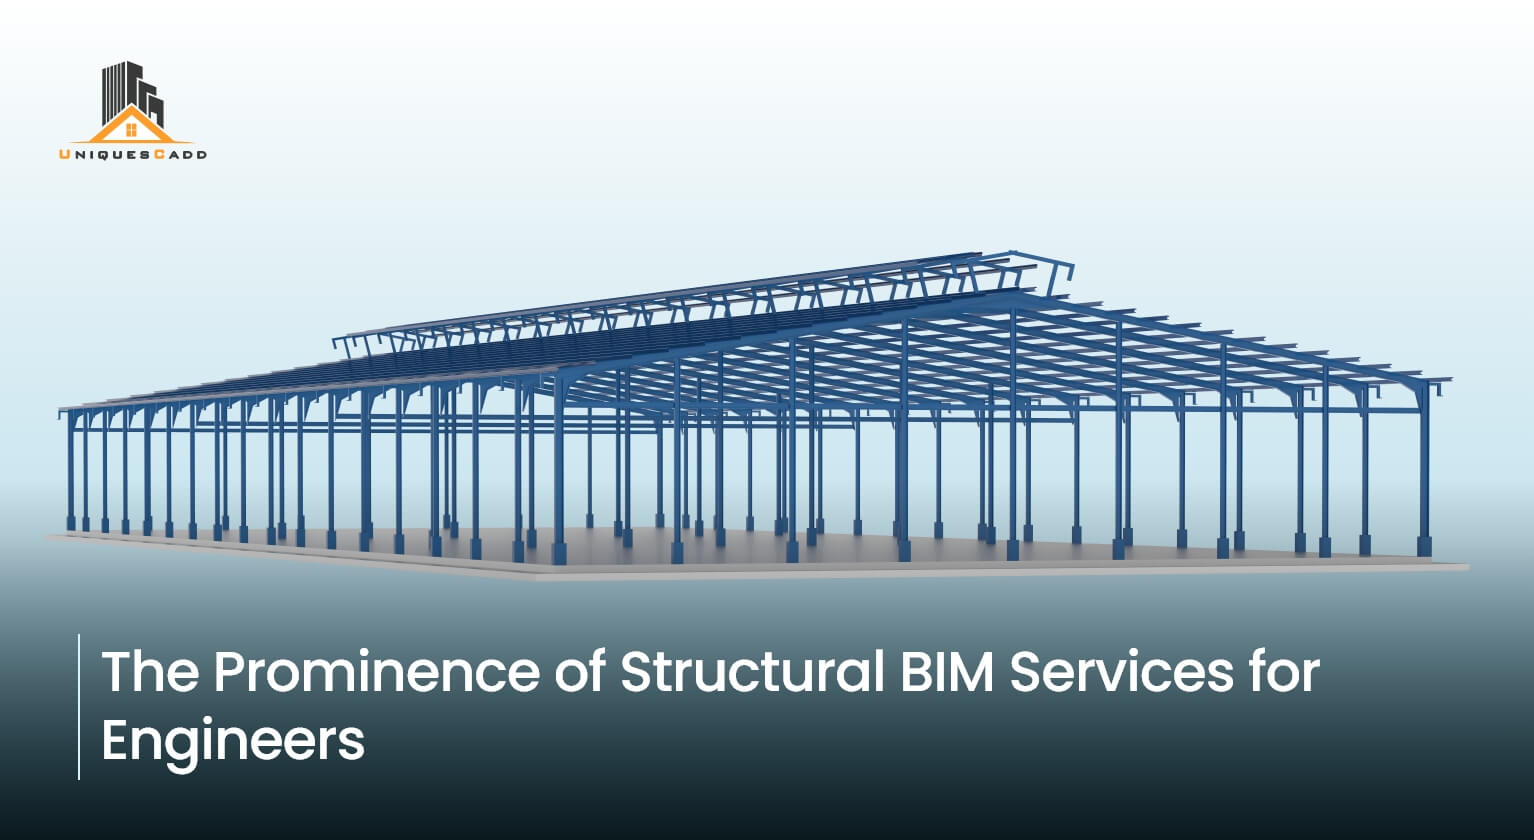 The Prominence of Structural BIM Services for Engineers